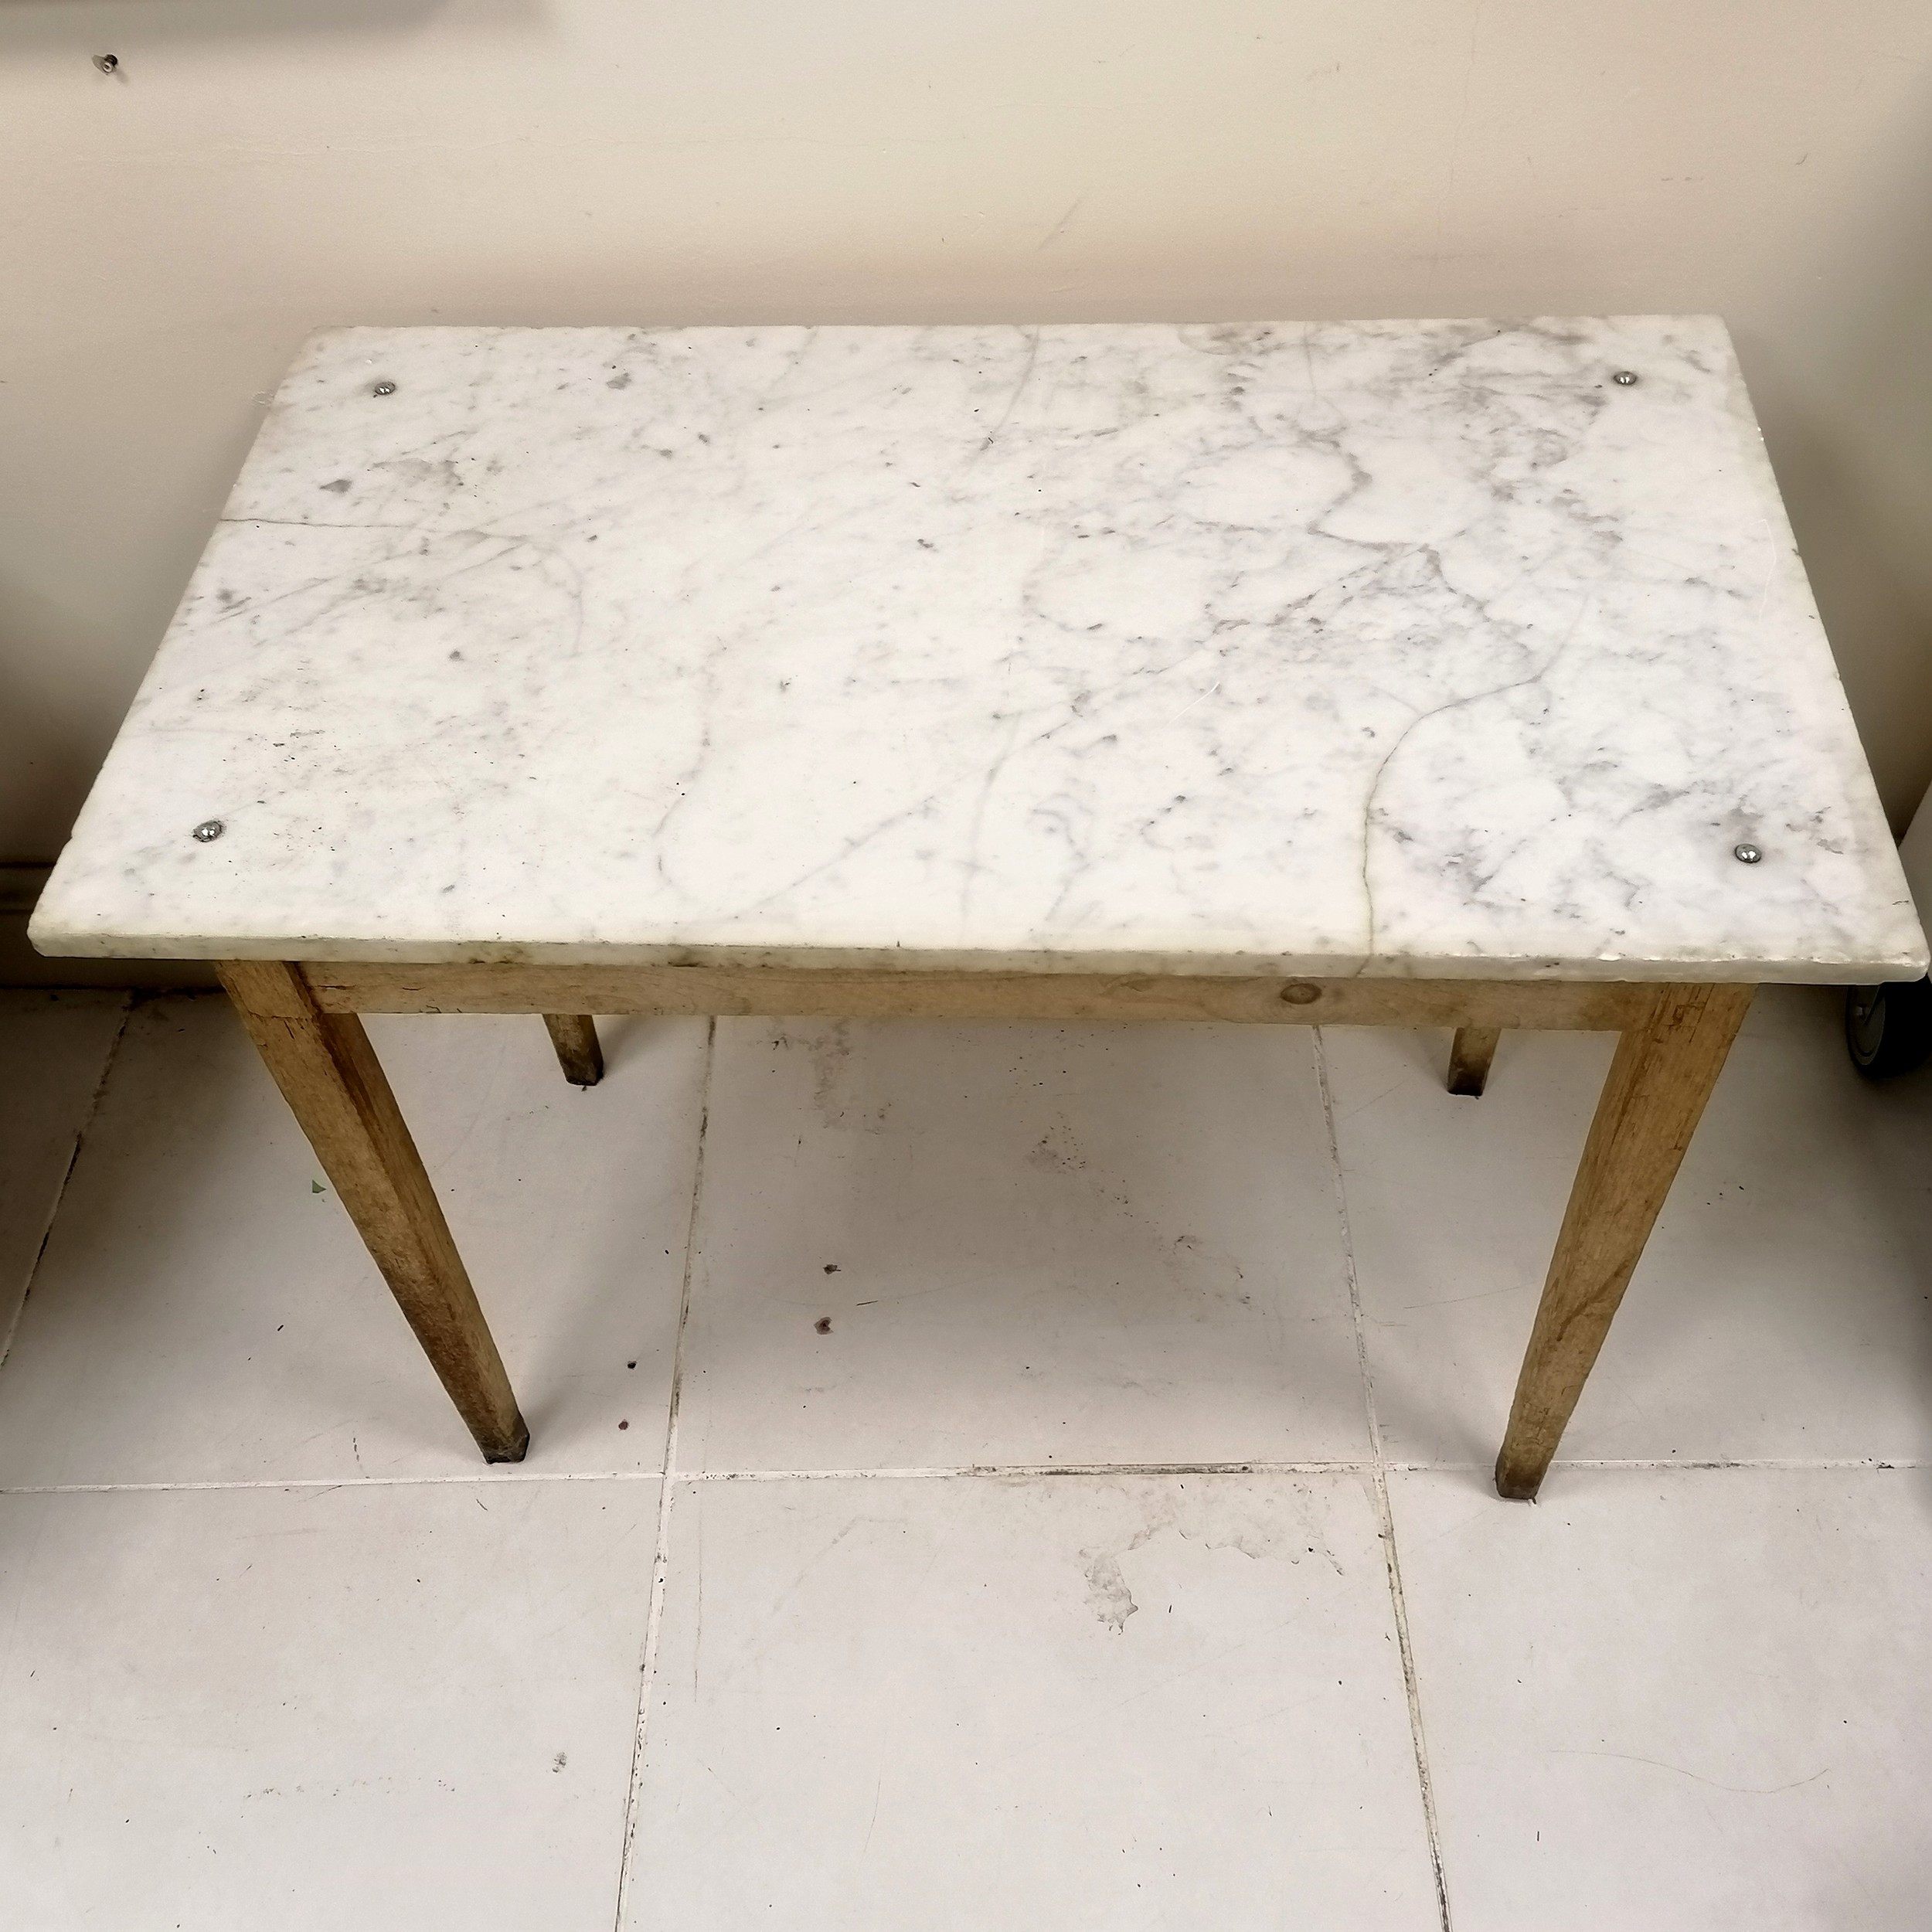 Antique marble topped pine pastry table 100cm x 58cm x 79cm high - Image 2 of 3